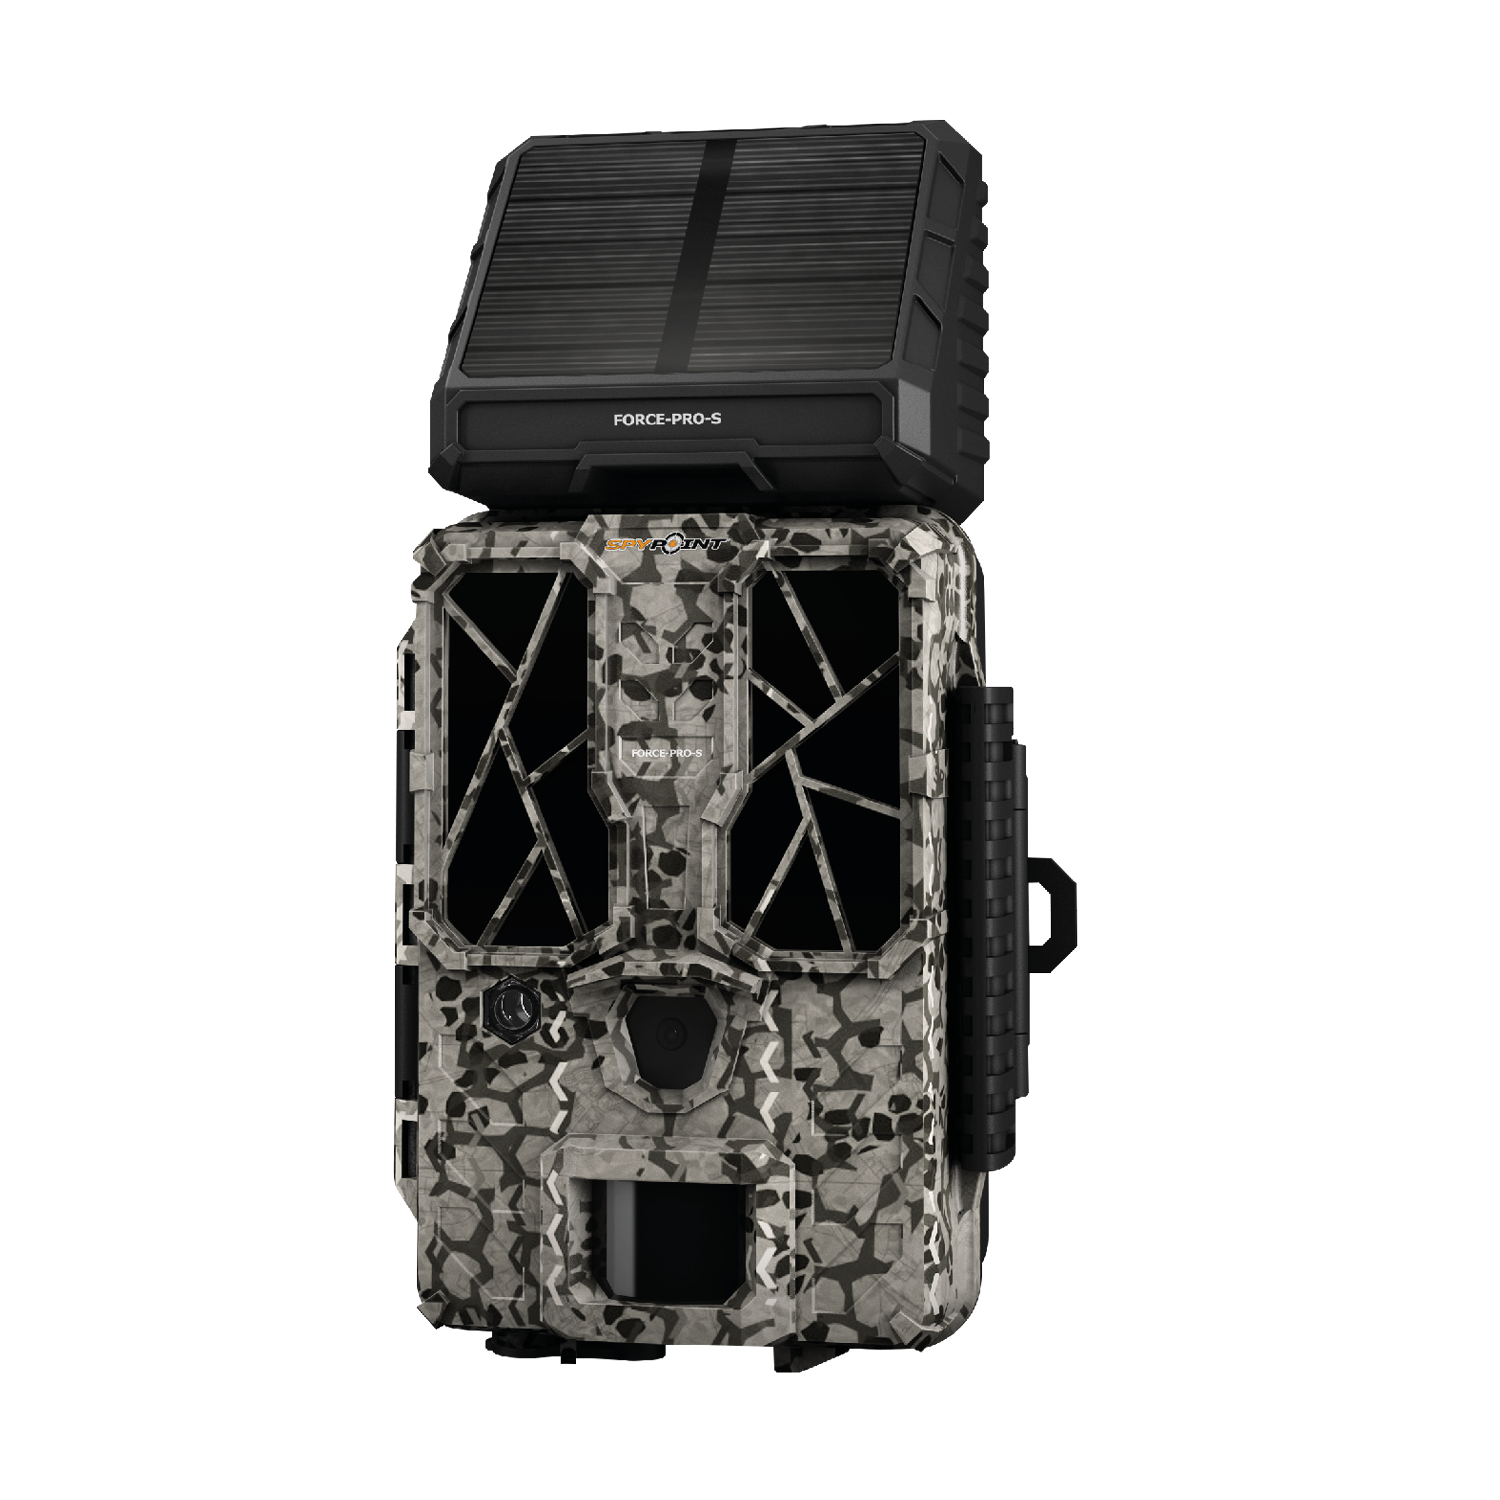 Spypoint FORCE-PRO-S Solar Trail Camera